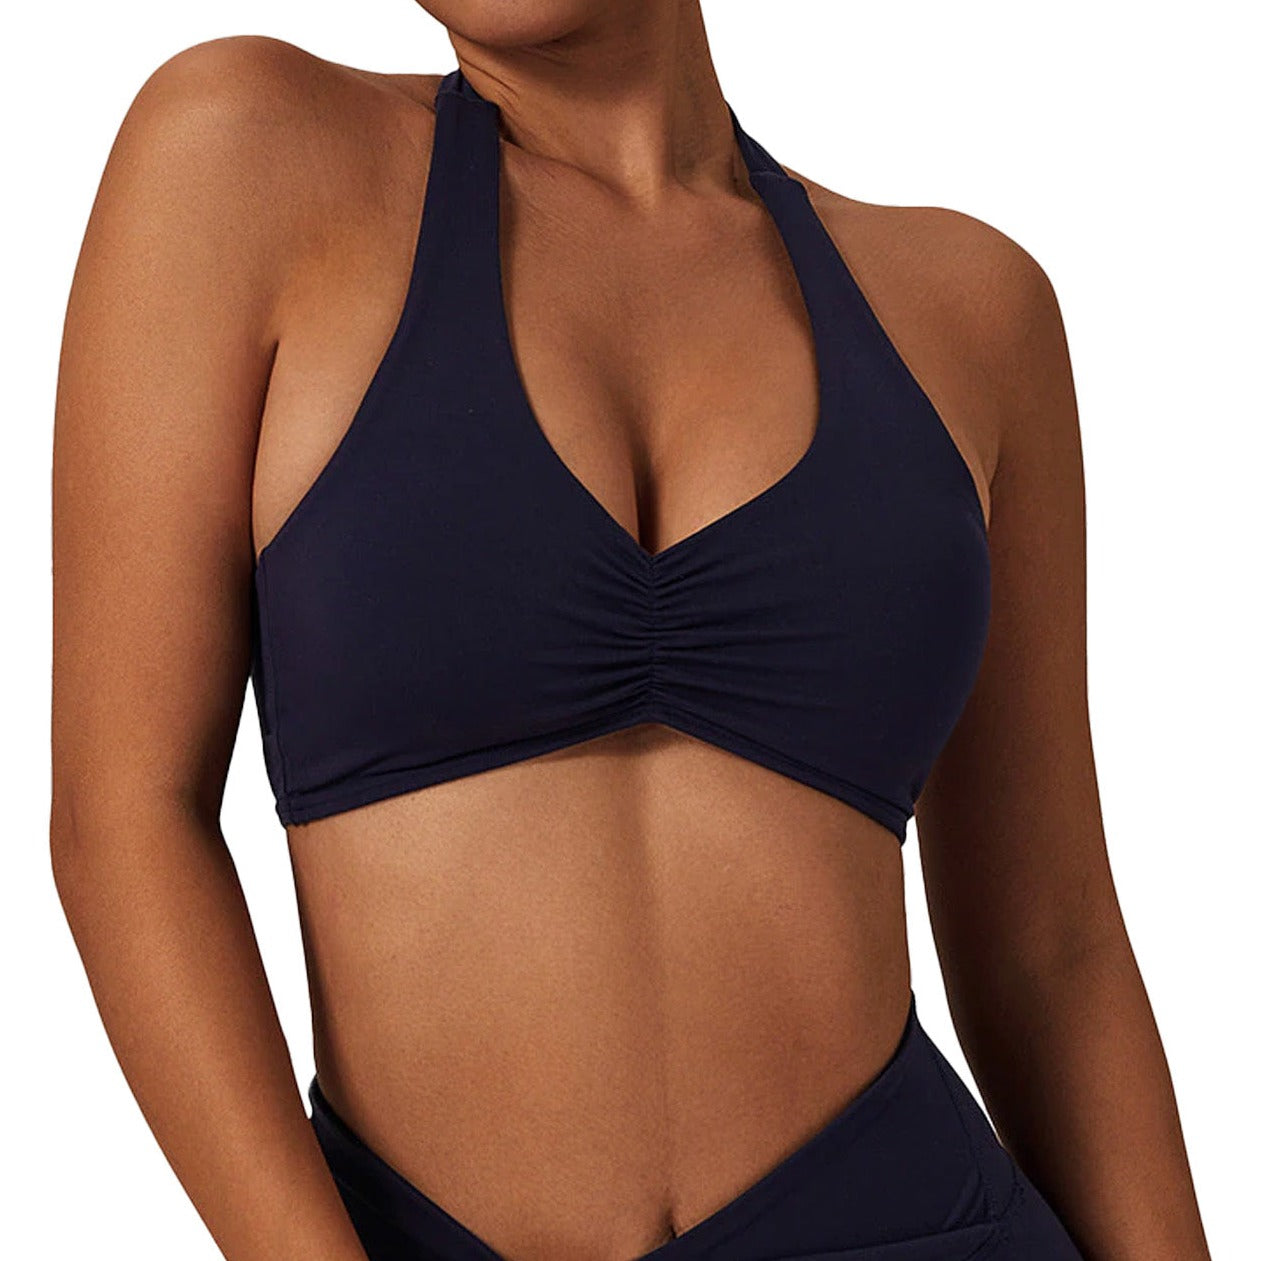 BLACK CROP TOP FOR SPORT AND YOGA WOMENS ACTIVE WEAR AUSTRALIA